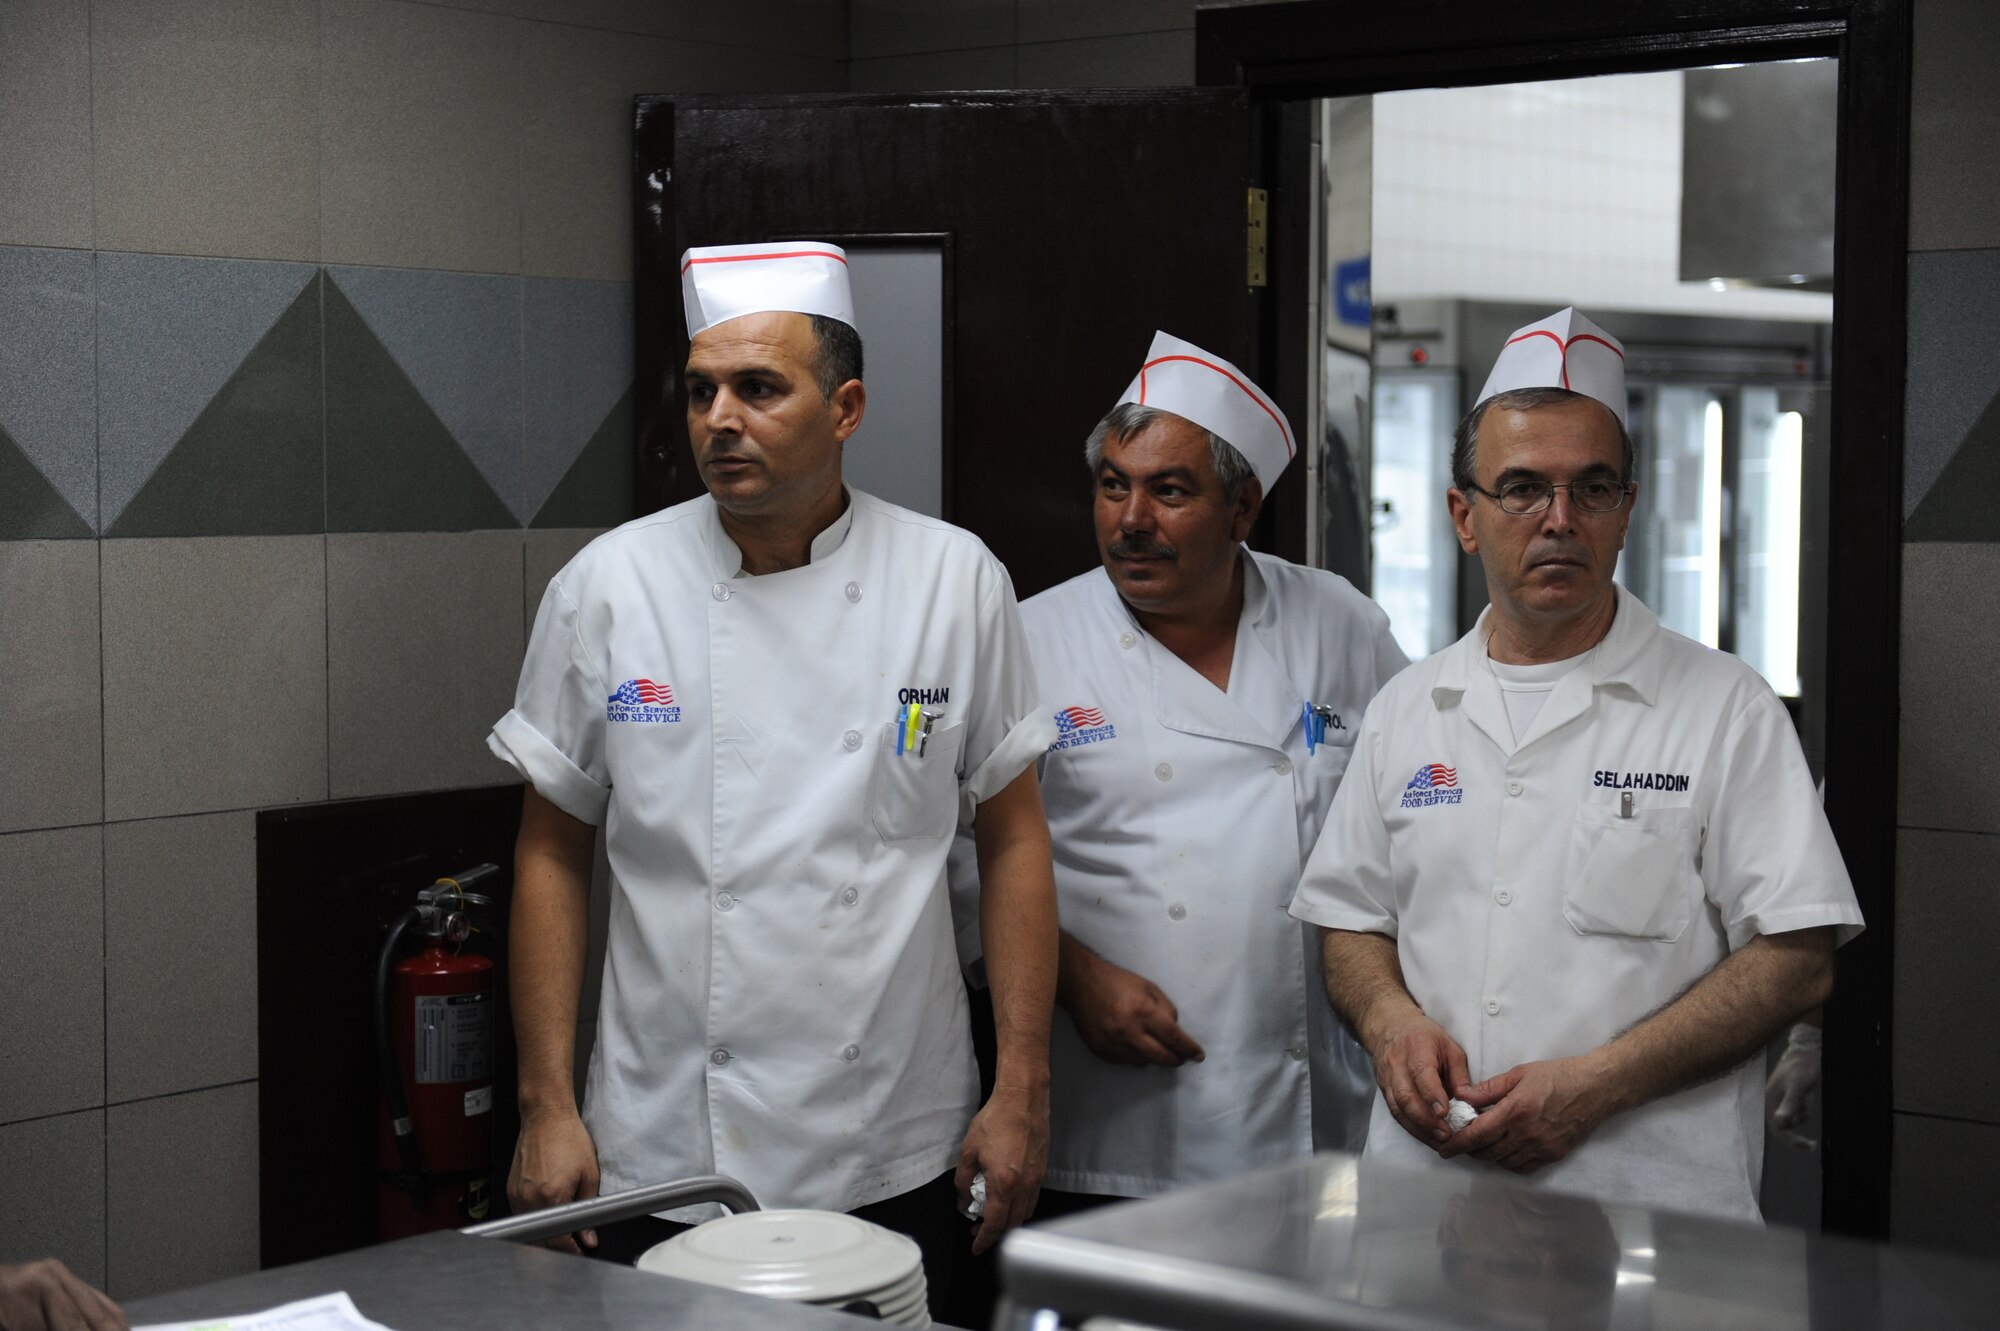 Orhan Kisial, 39th Force Support Squadron senior cook, Naci Erol, 39th FSS senior cook, and Selahaddin Aydin, 39th FSS food services helper, talk before the dining facility opens July 27, 2012, at the Sultan's Inn Dining Facility at Incirlik Air Base, Turkey. The Sultan's Inn offers breakfast, lunch, dinner and early breakfast on weekends. (U.S. Air Force photo by Senior Airman William A. O'Brien/Released) 